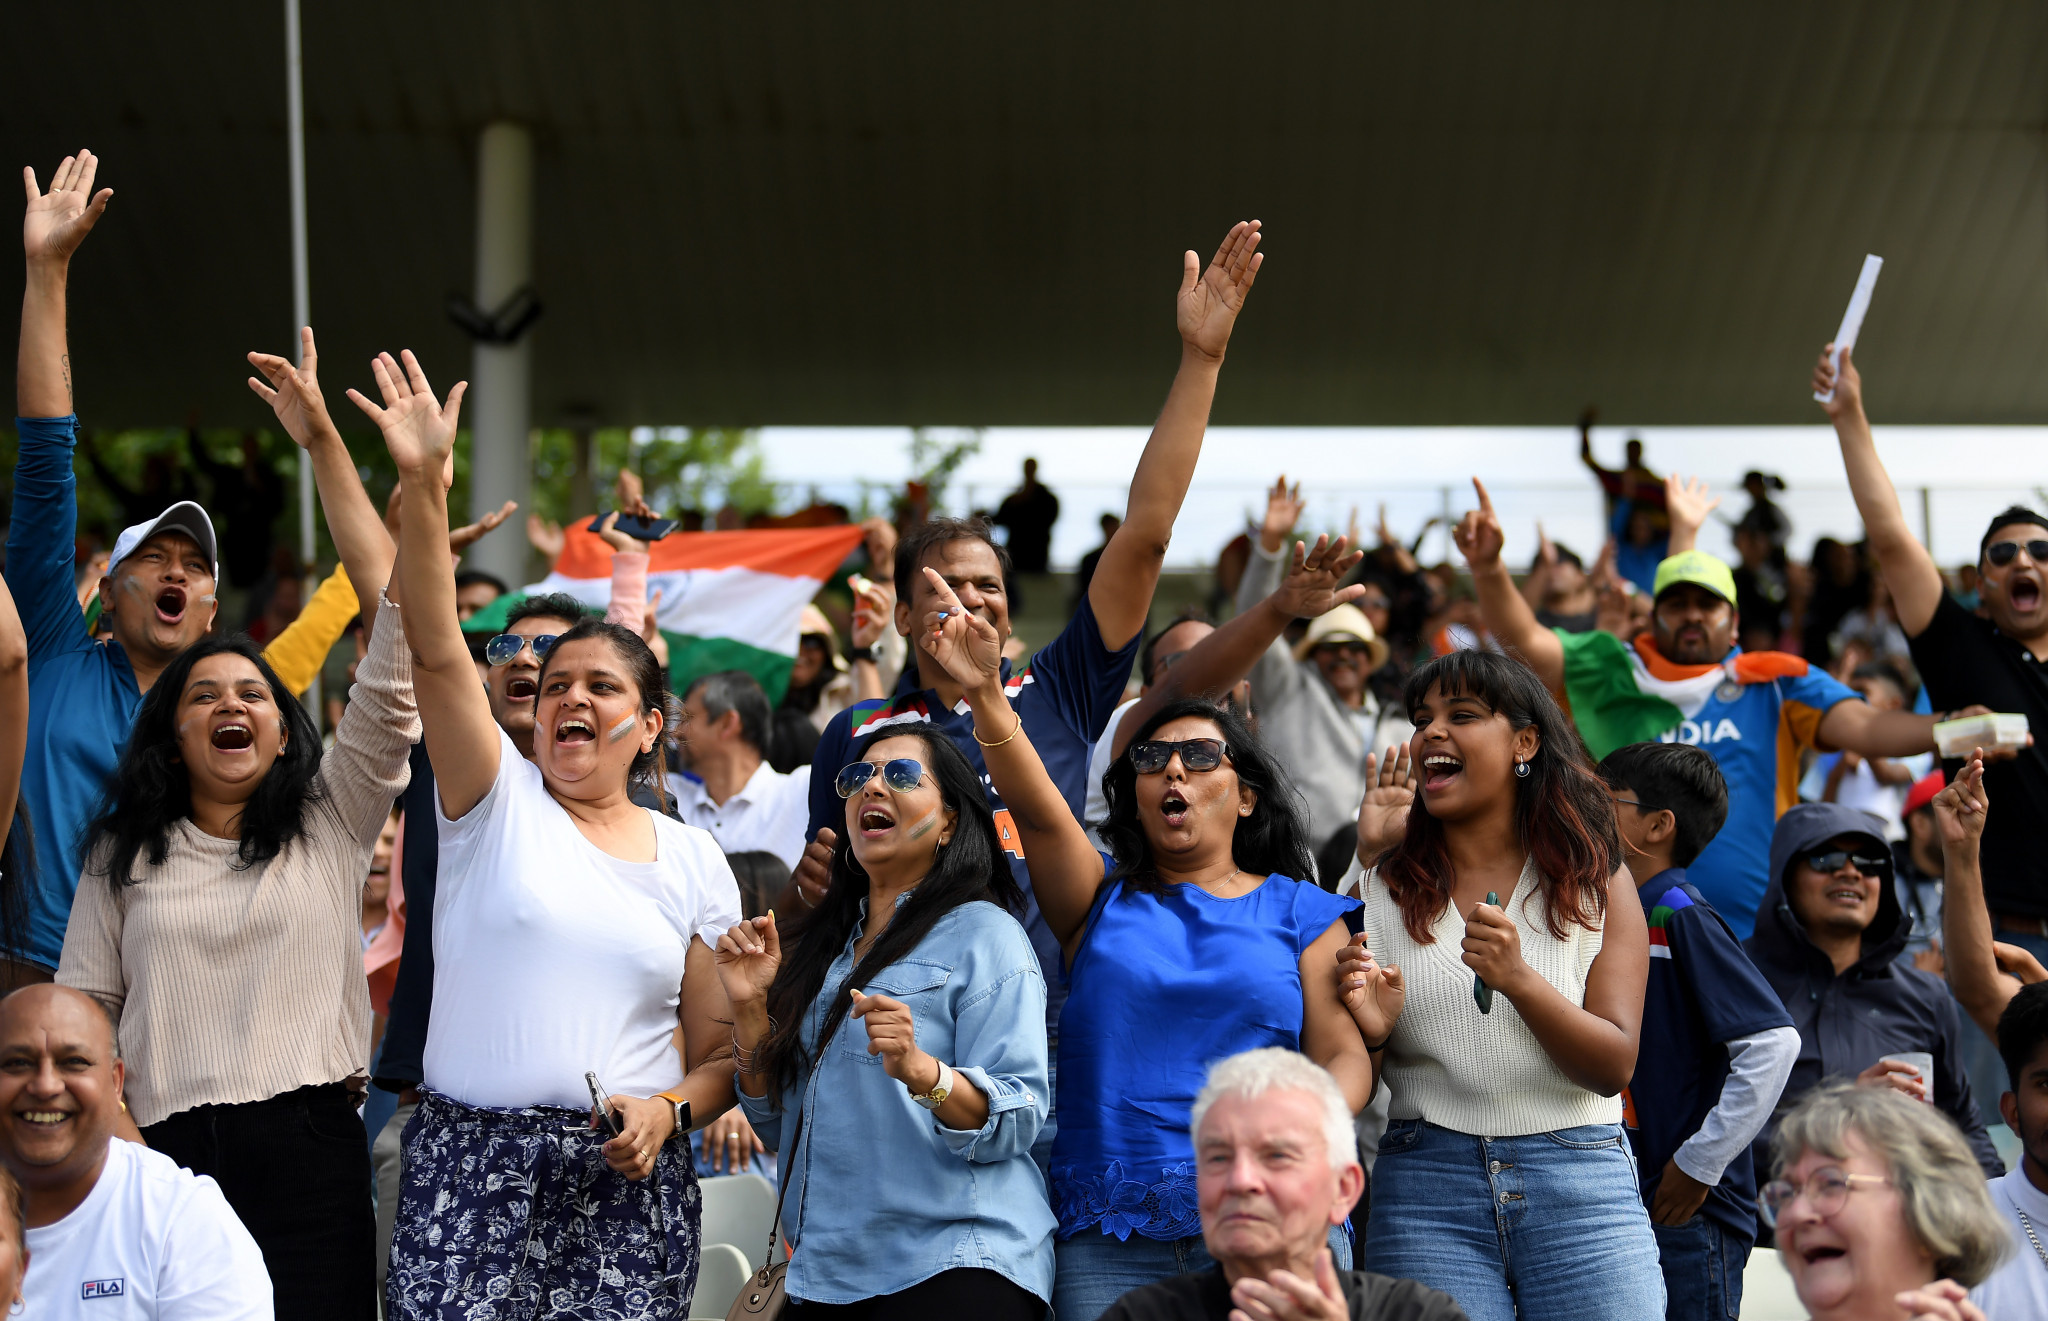 Passionate India fans created a lively atmosphere for the day's opening cricket match at Edgbaston ©Getty Images